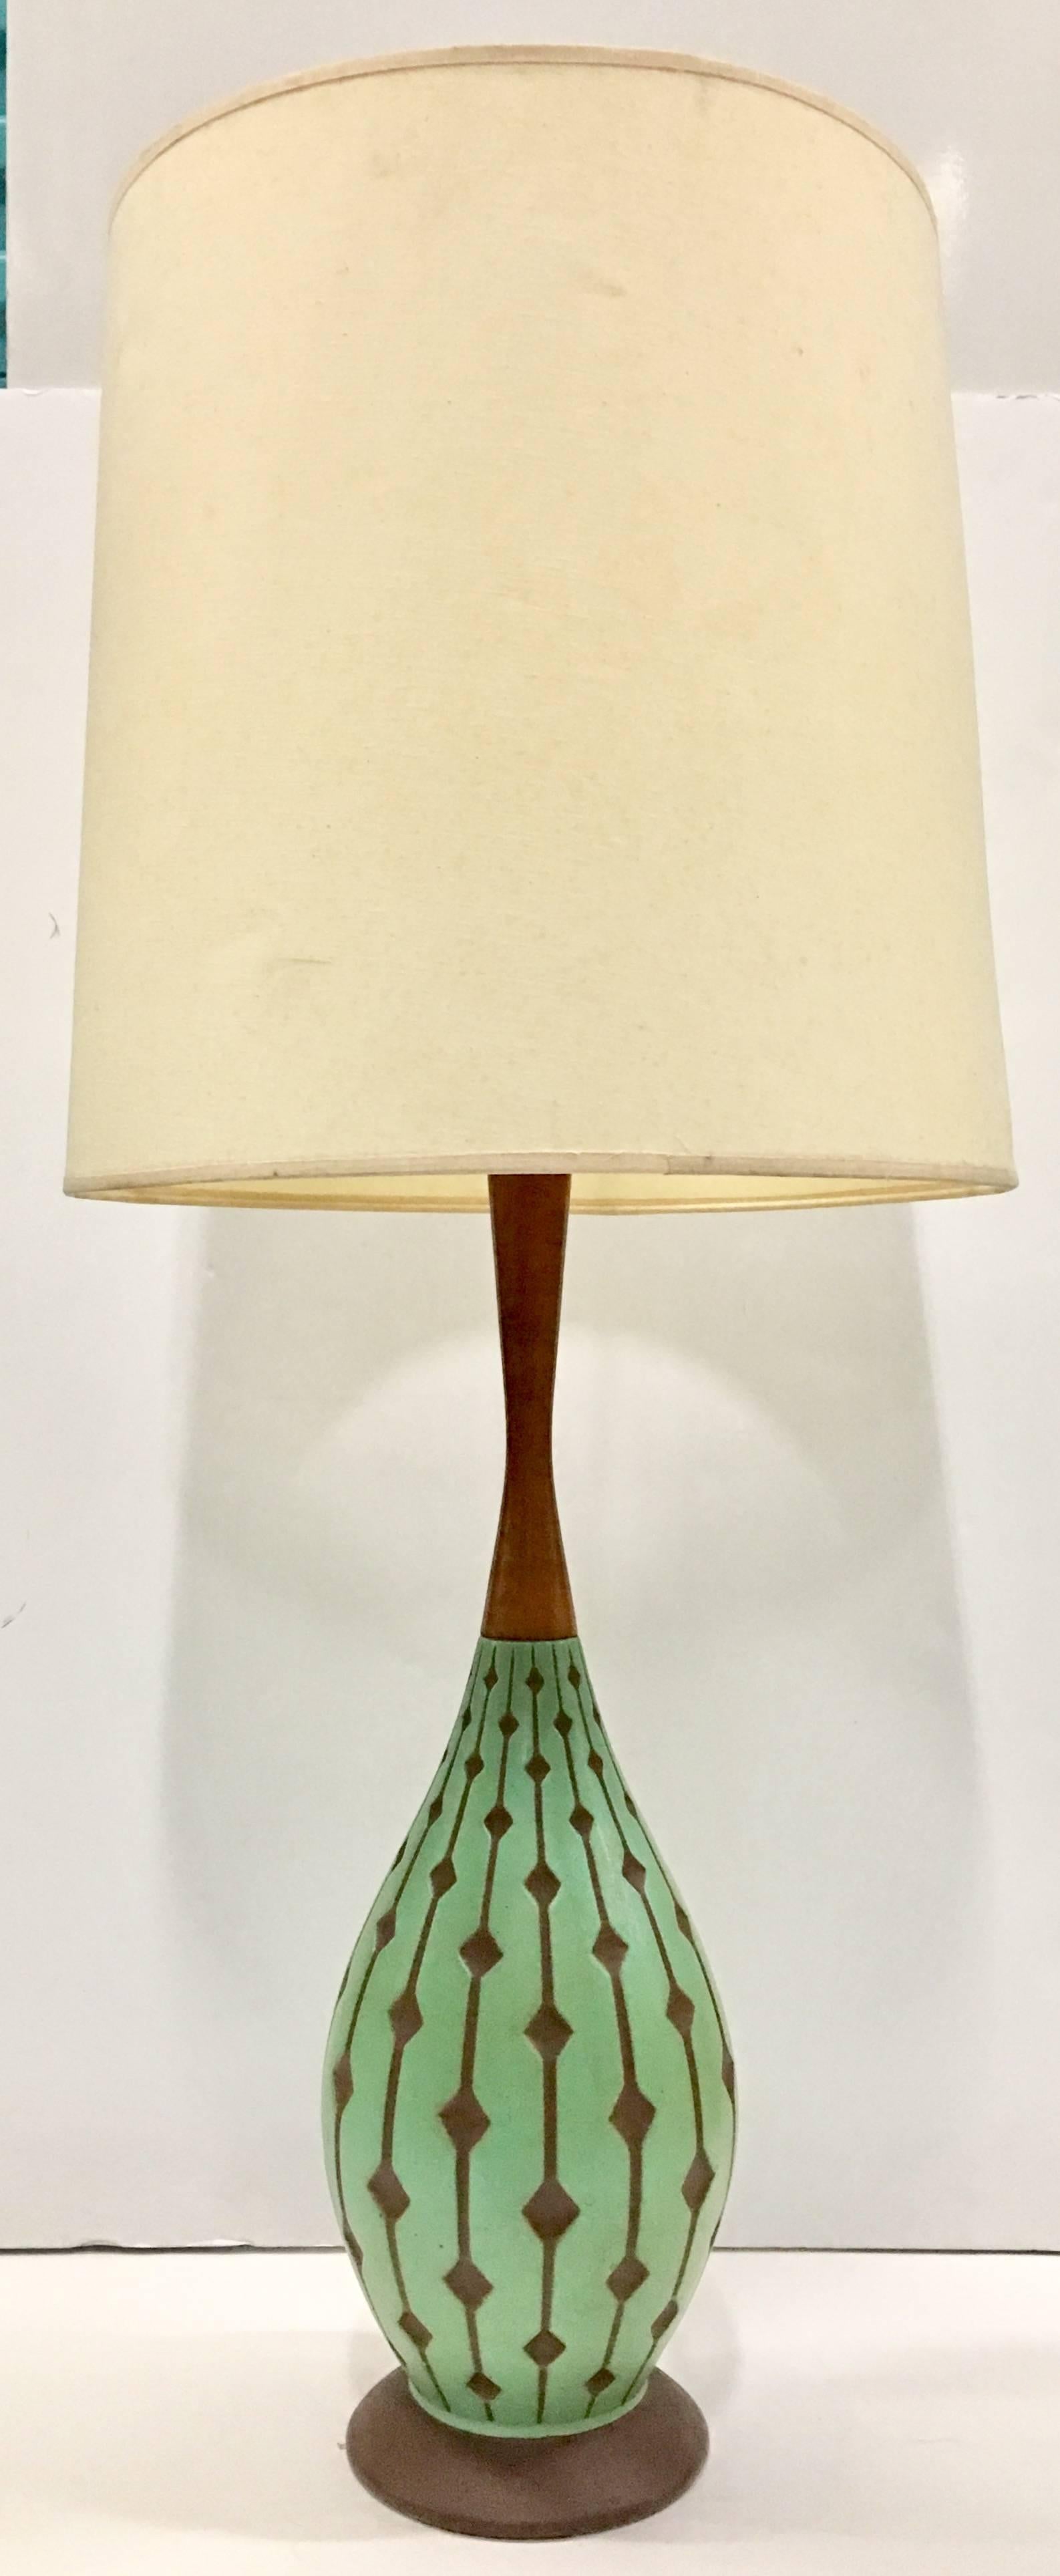 Incredible and unique these quintessential Mid-Century Modern "Bowling Pin" shape hand-painted inverted diamond pattern lamps are made entirely of ceramic until you reach the neck. The neck is made of walnut. The bases are made entirely of